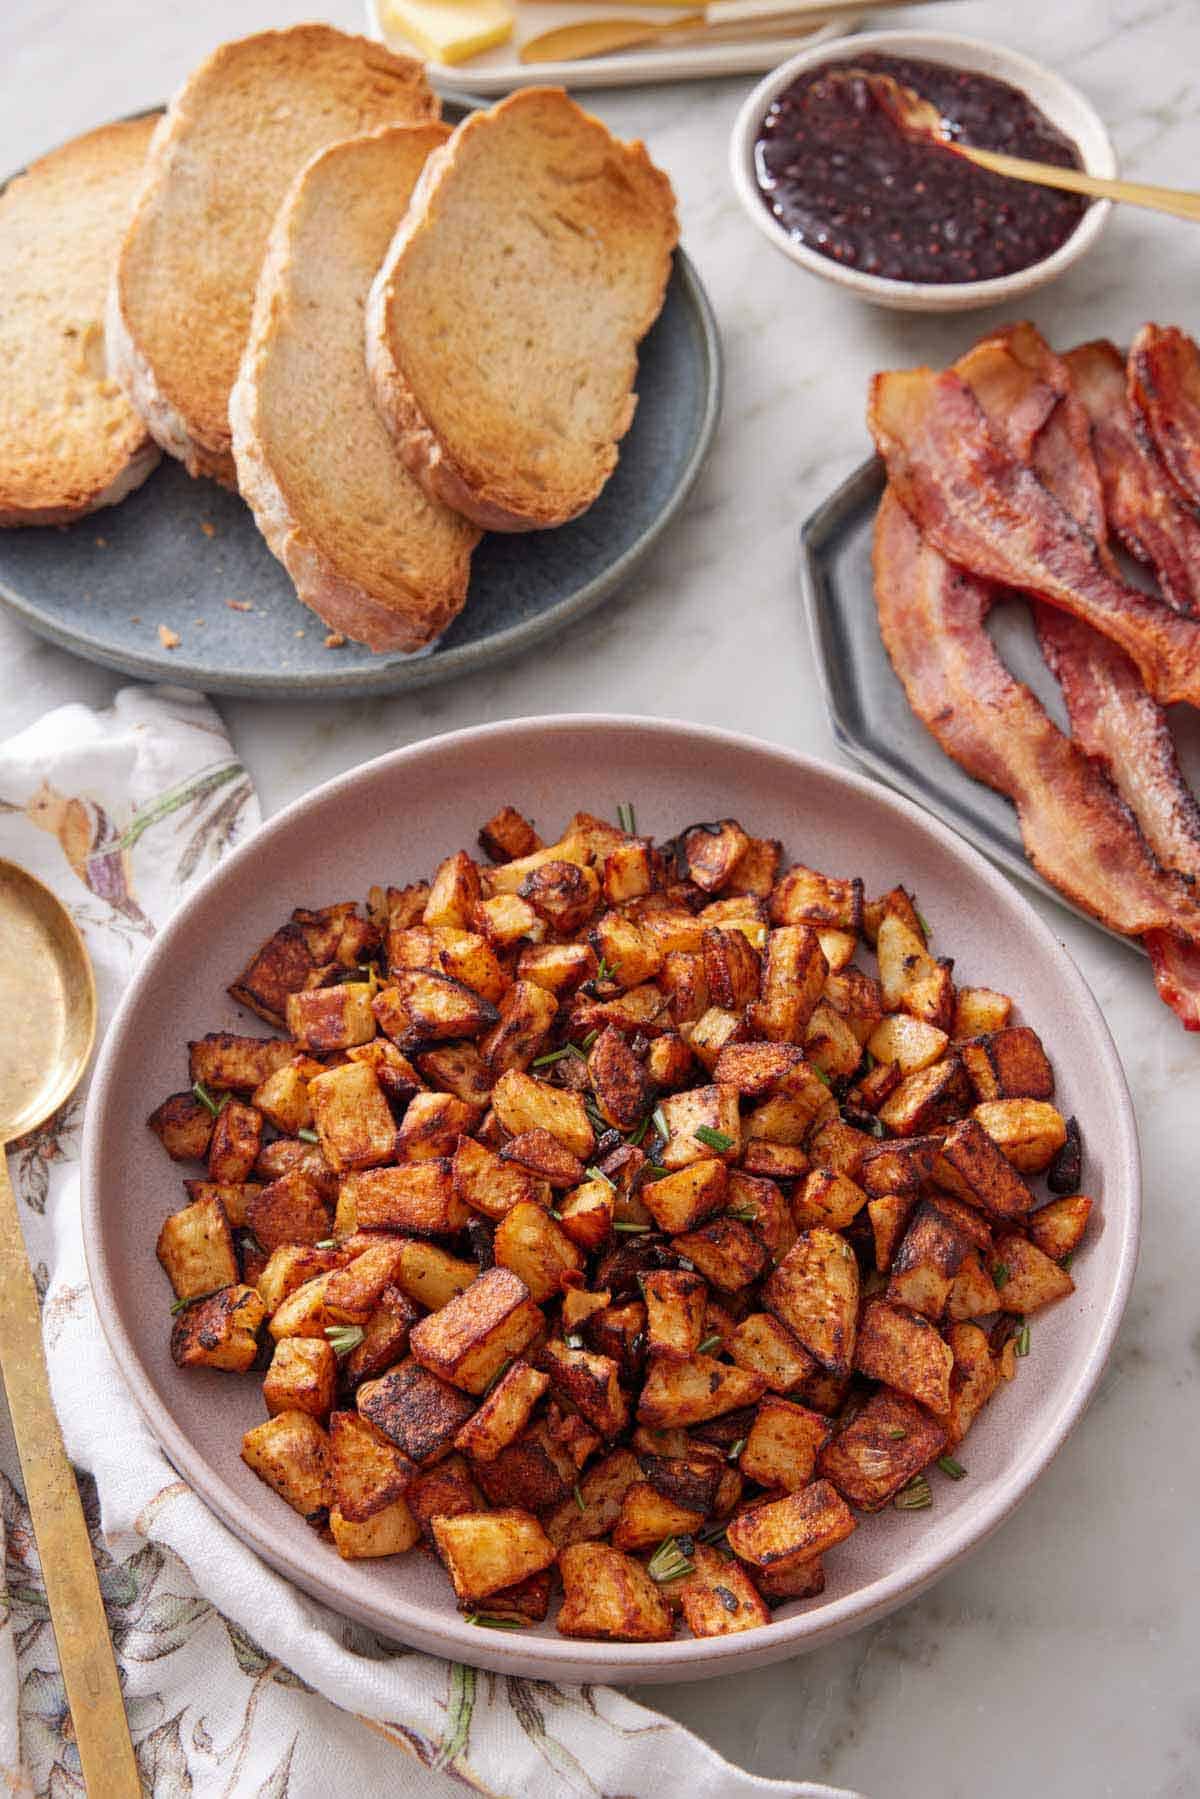 A plate with breakfast potatoes topped with chopped rosemary. A plate of toast and bacon in the back.